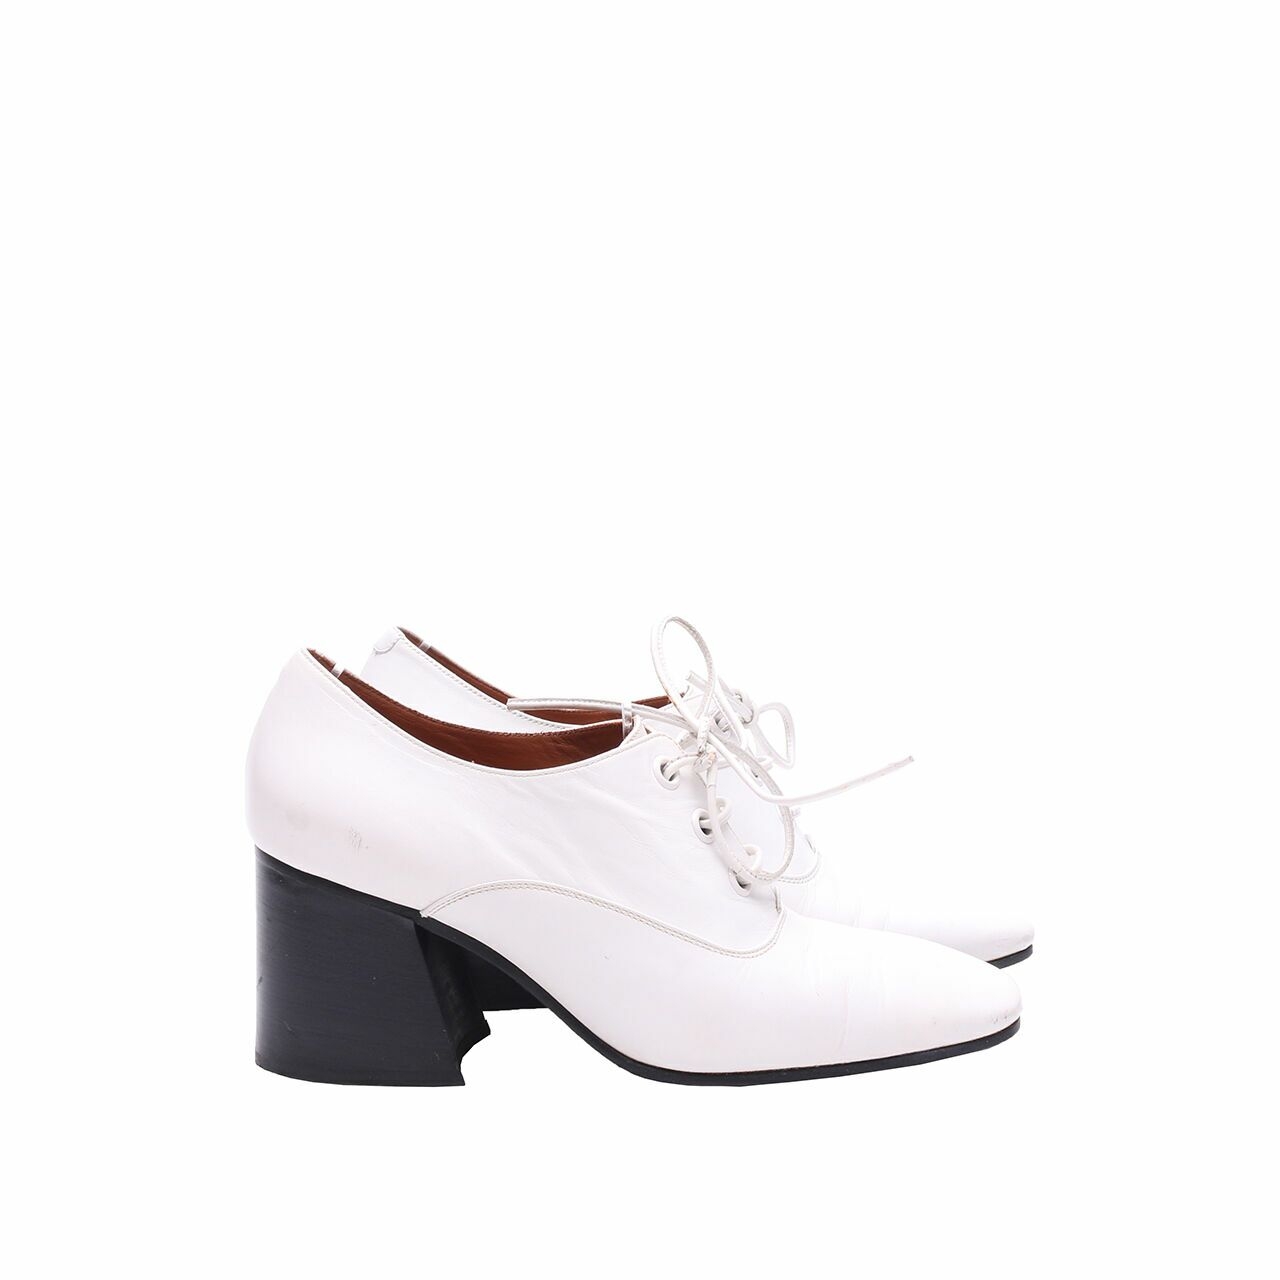 Celine White Ankle Heels Boots